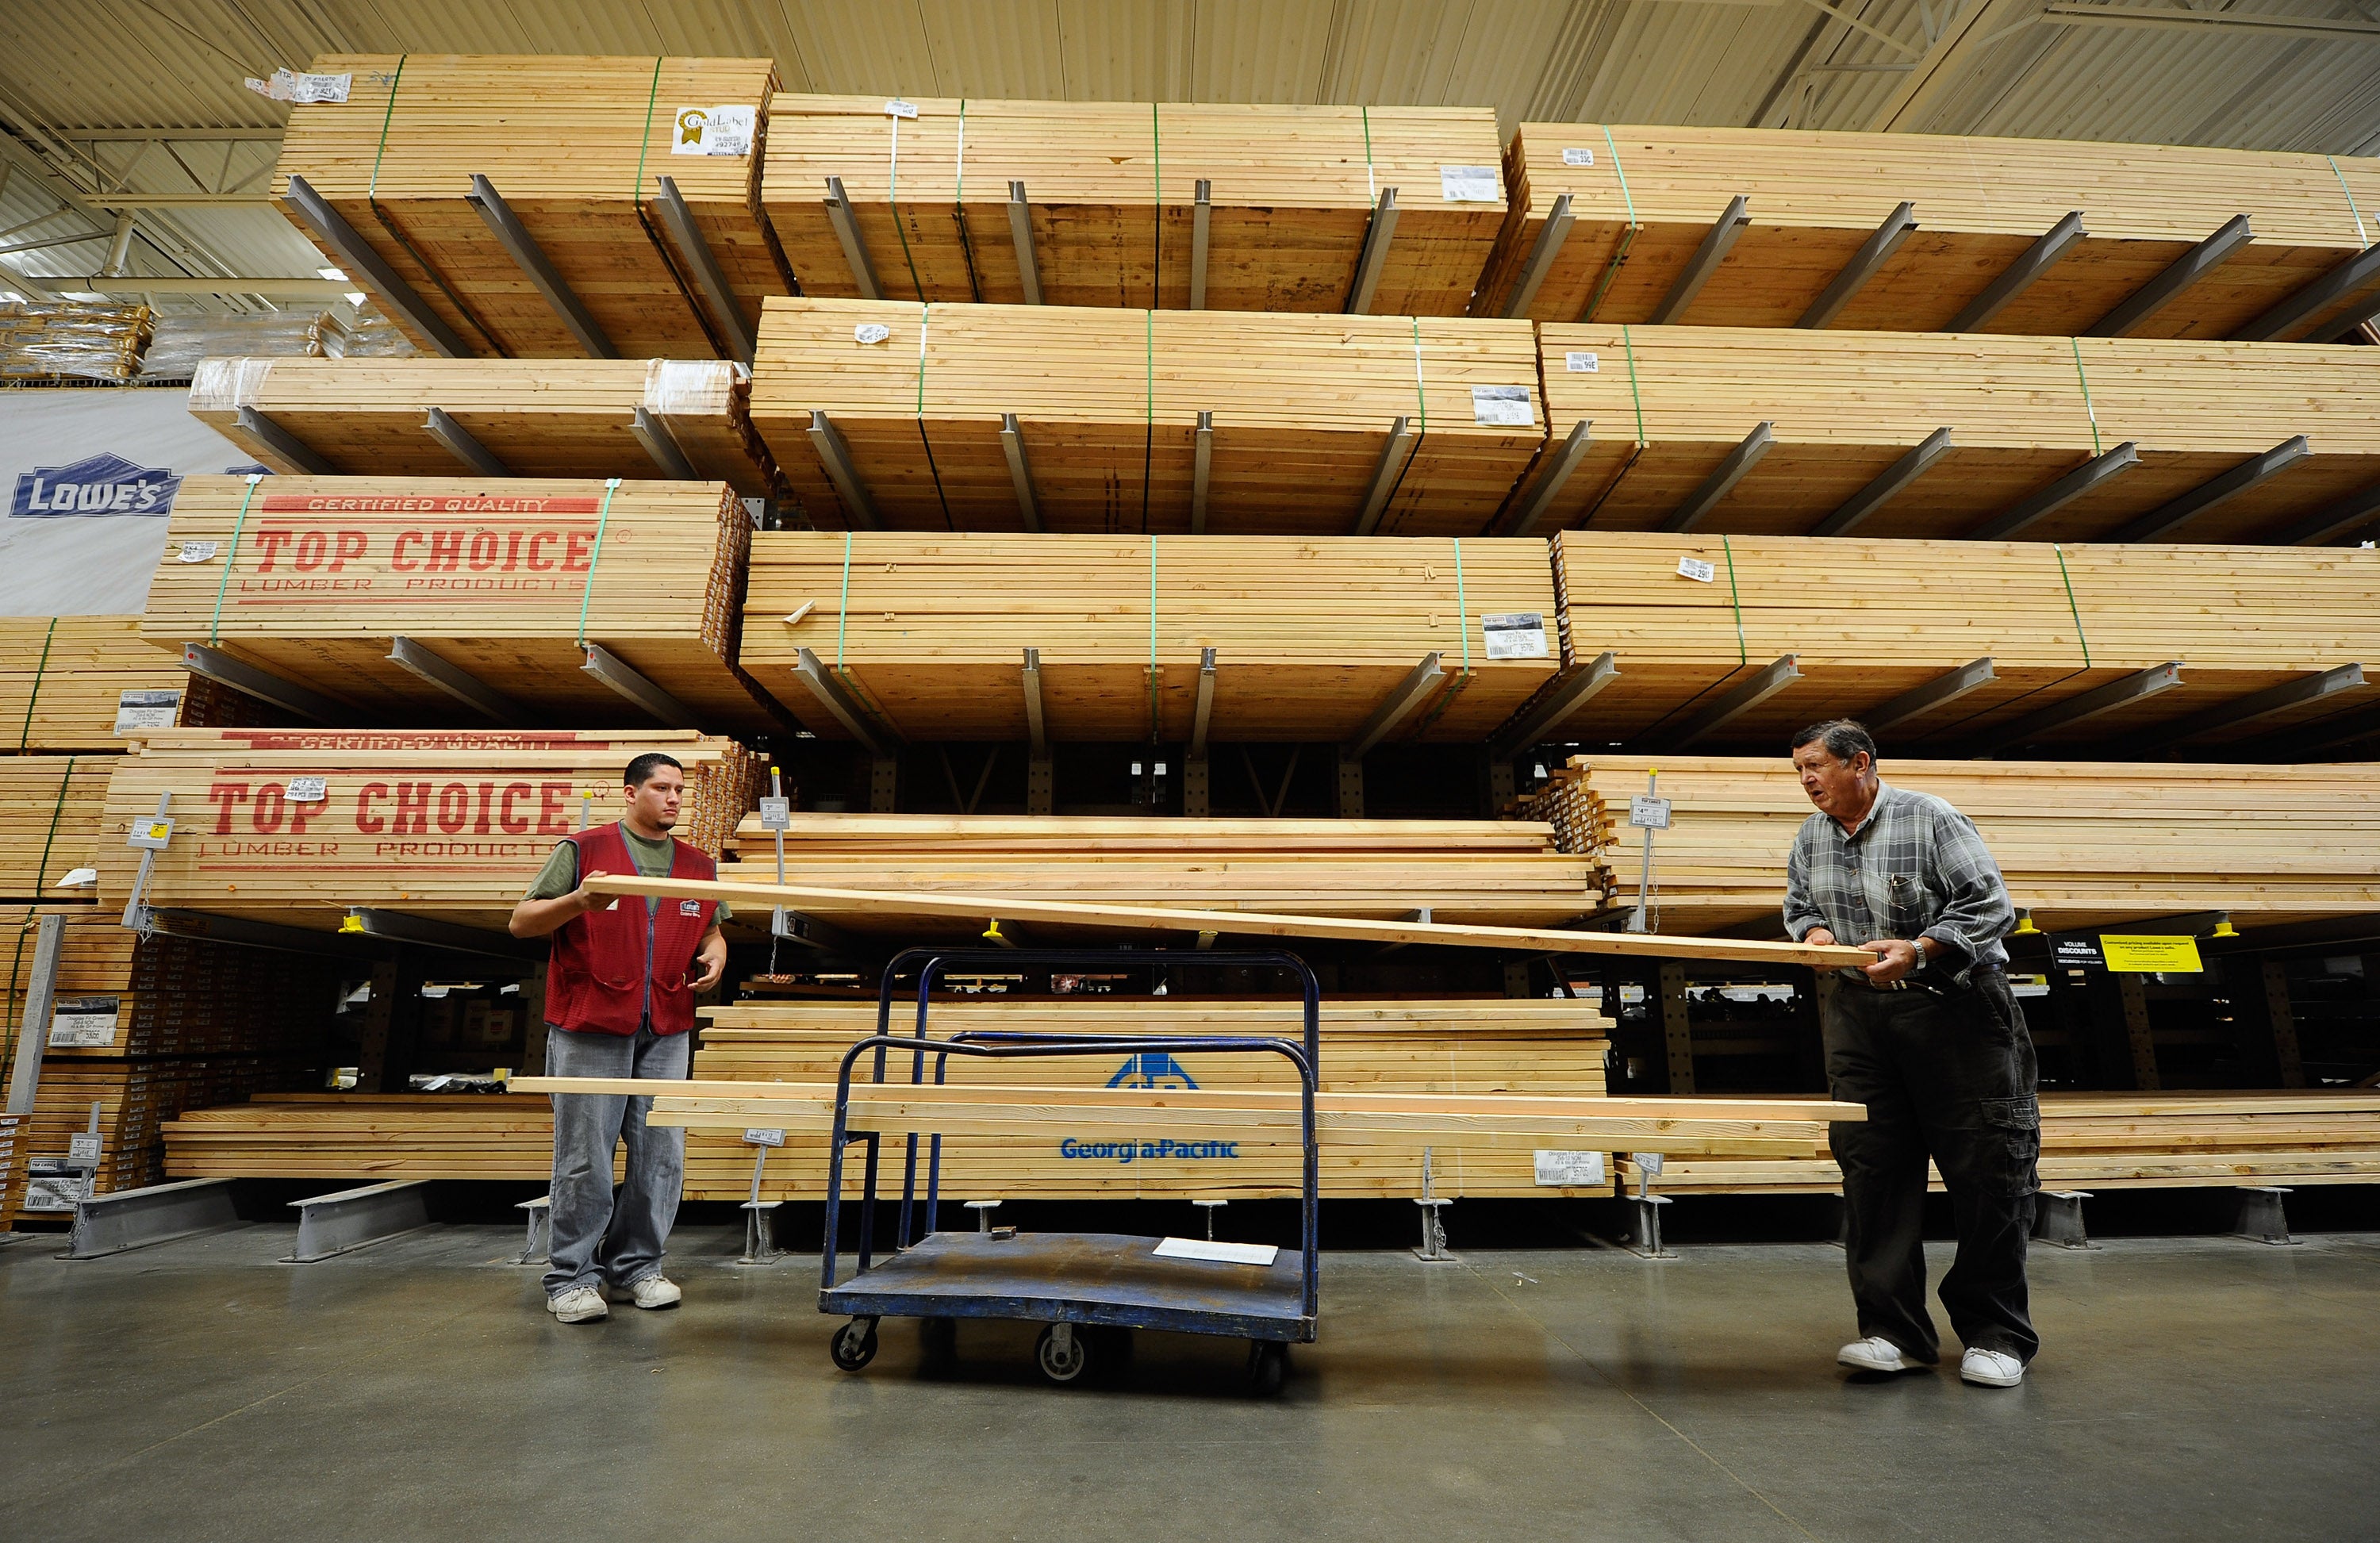 The US has been hit by a lumber shortage during the pandemic which could be partially fuelled by a house building and DIY boom. Pictured is the lumber department at Lowe’s.